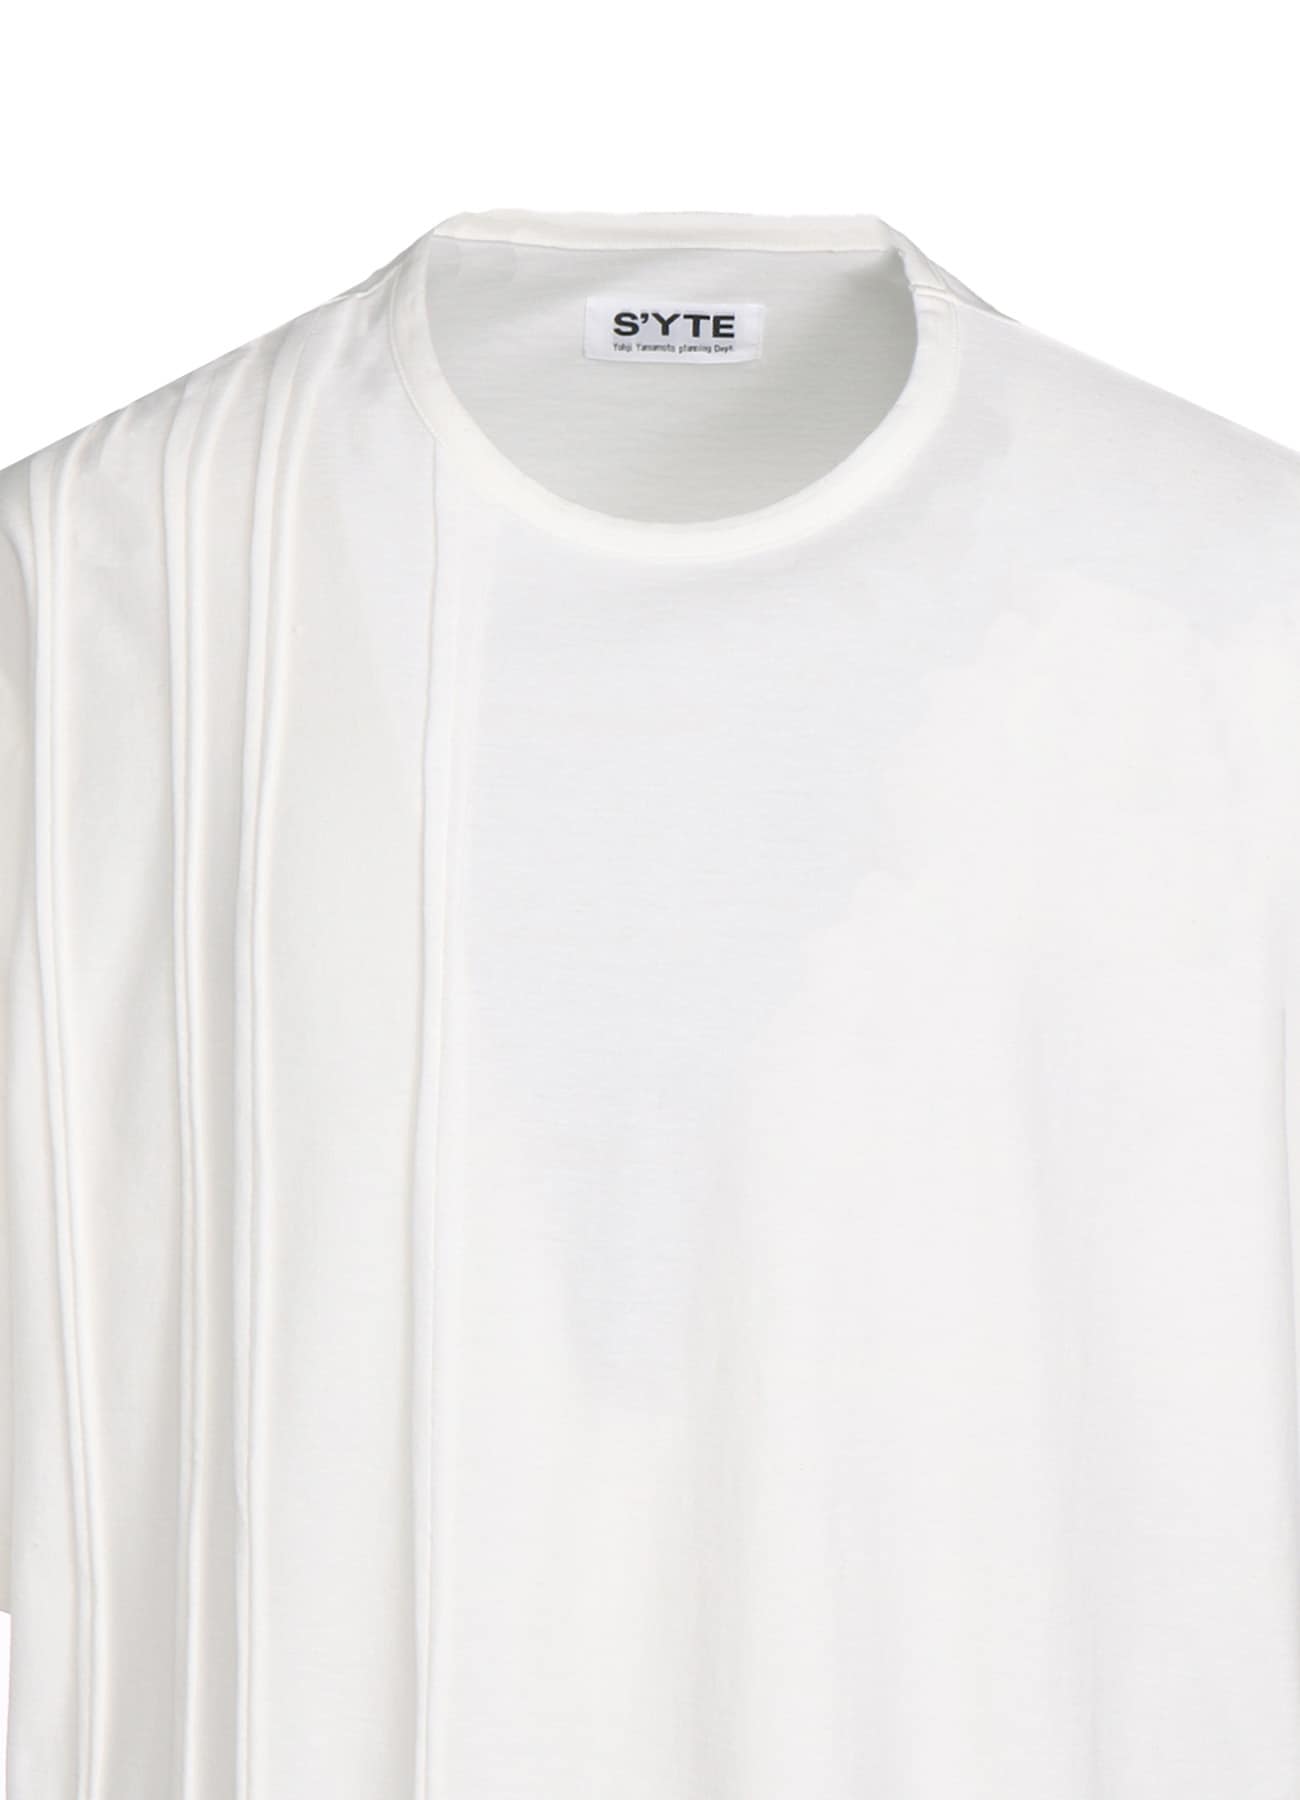 COTTON JERSEY VERTICALLY GRAFTED STRIPED T-SHIRT(M White): S'YTE 